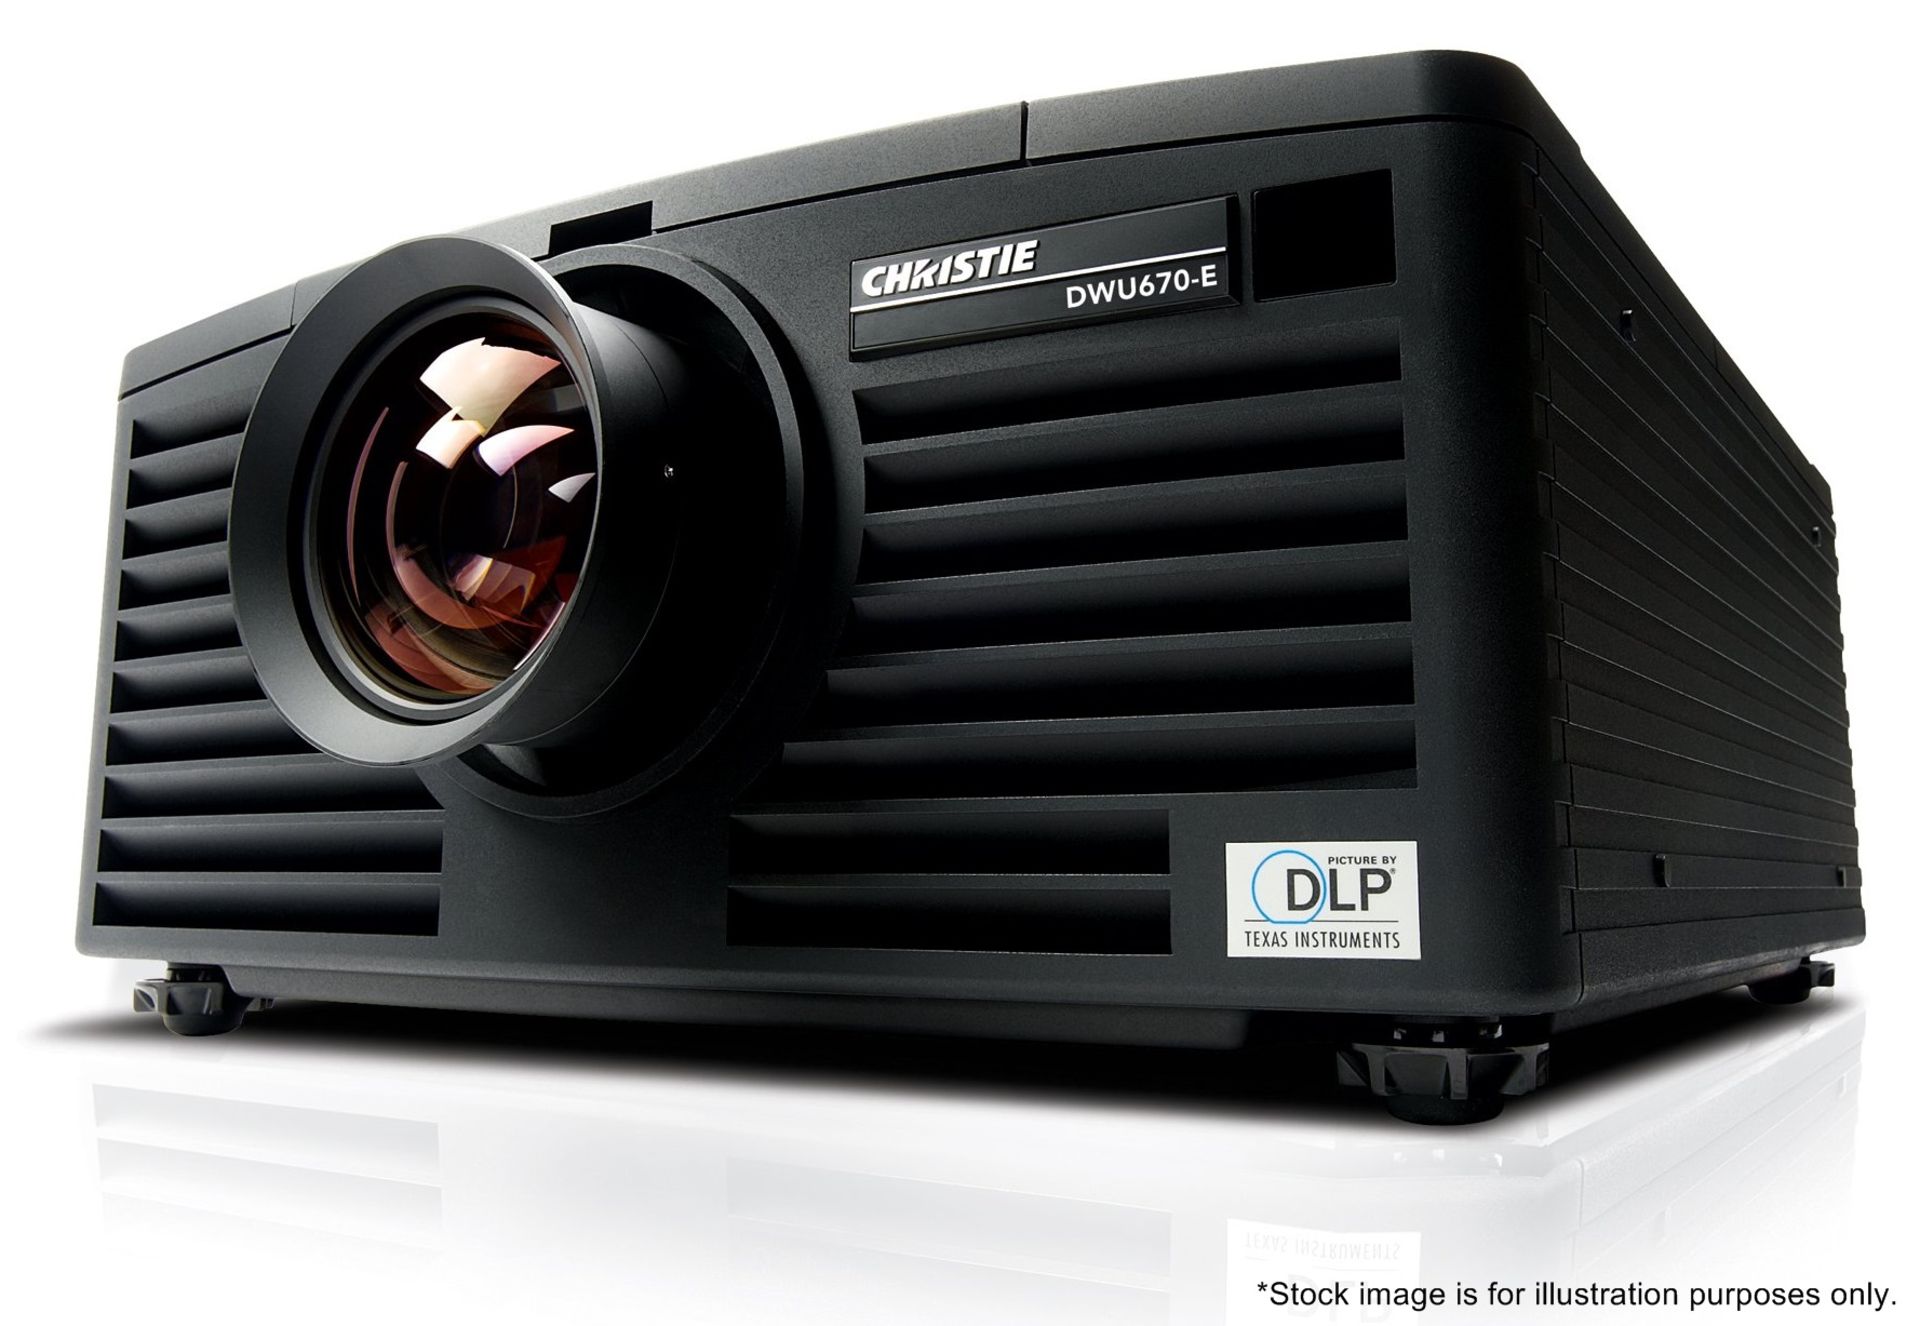 1 x 6K Christie DWU670-E Projector With Remote Control, 2 x Lense Fittings & Power Leads In Flight